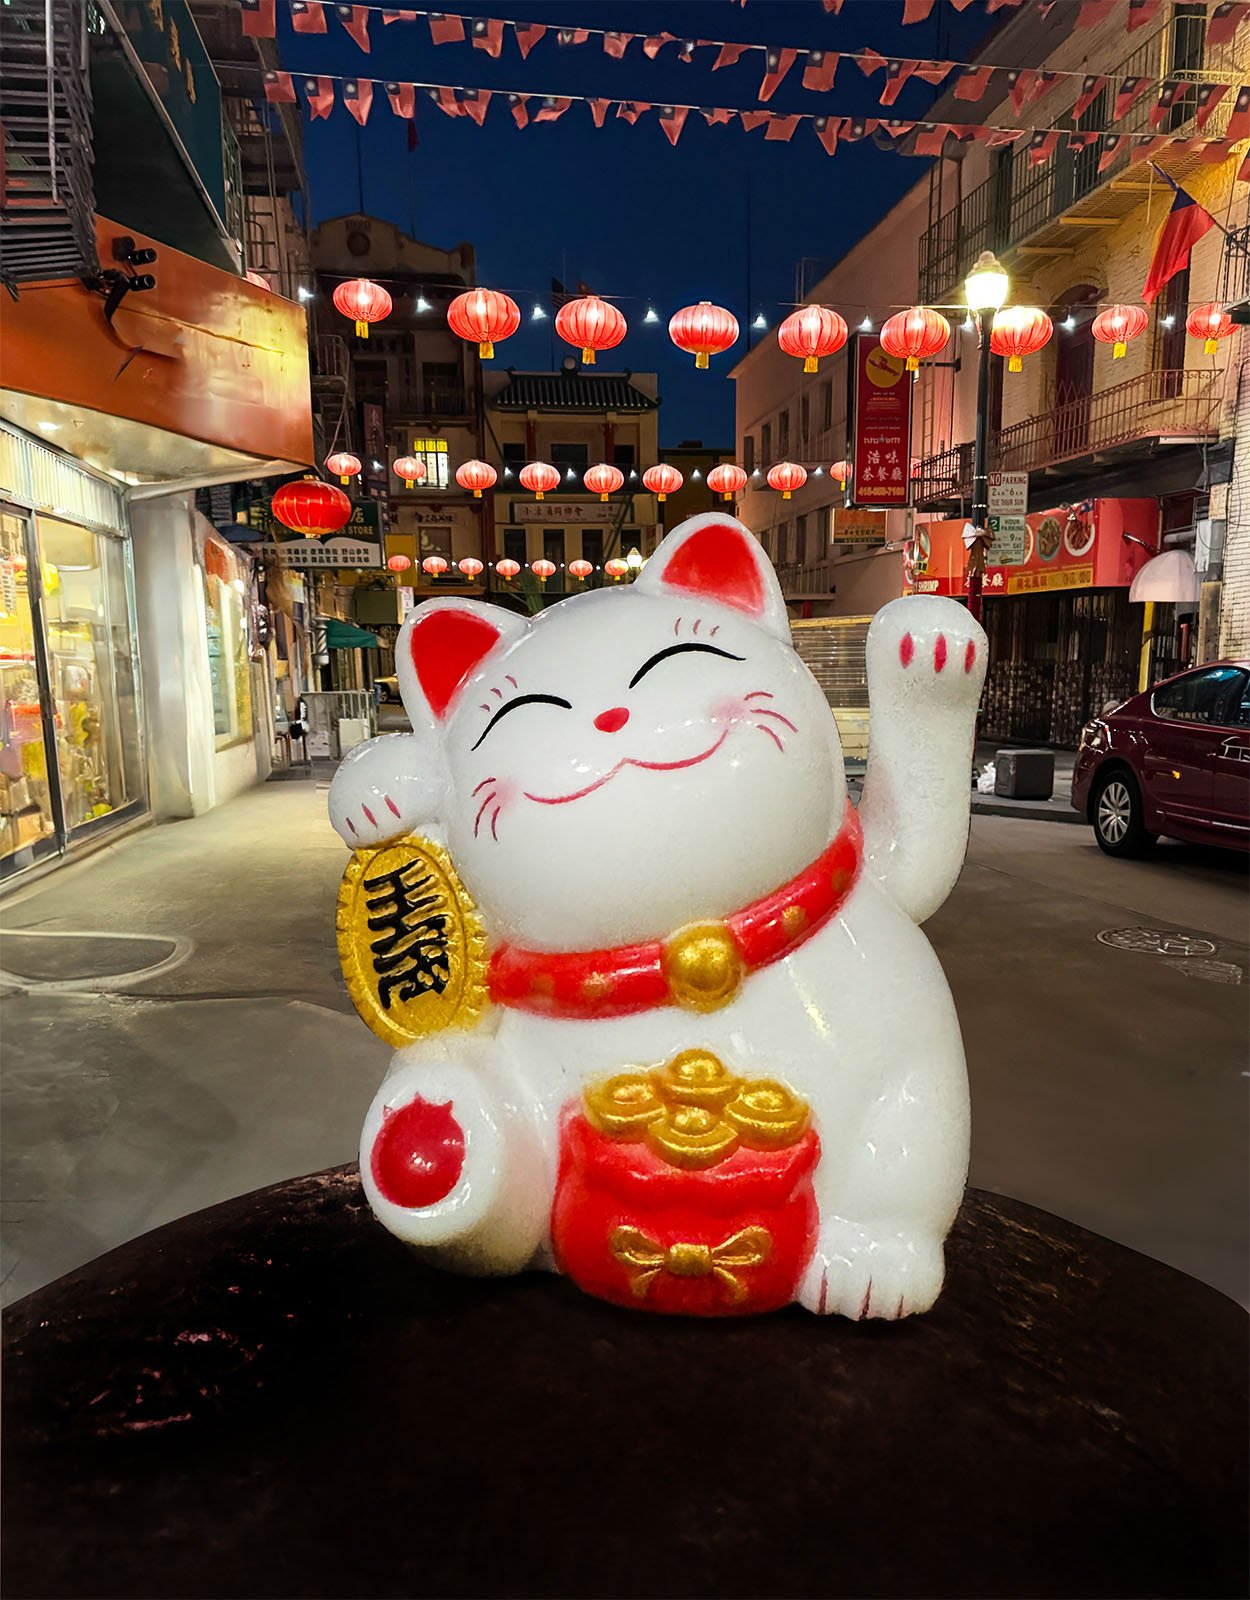 A white and red Maneki-neko (beckoning cat) figurine with a raised paw and golden accents is prominently displayed in the foreground. In the background, there is a street adorned with red lanterns and warmly lit shops at dusk.